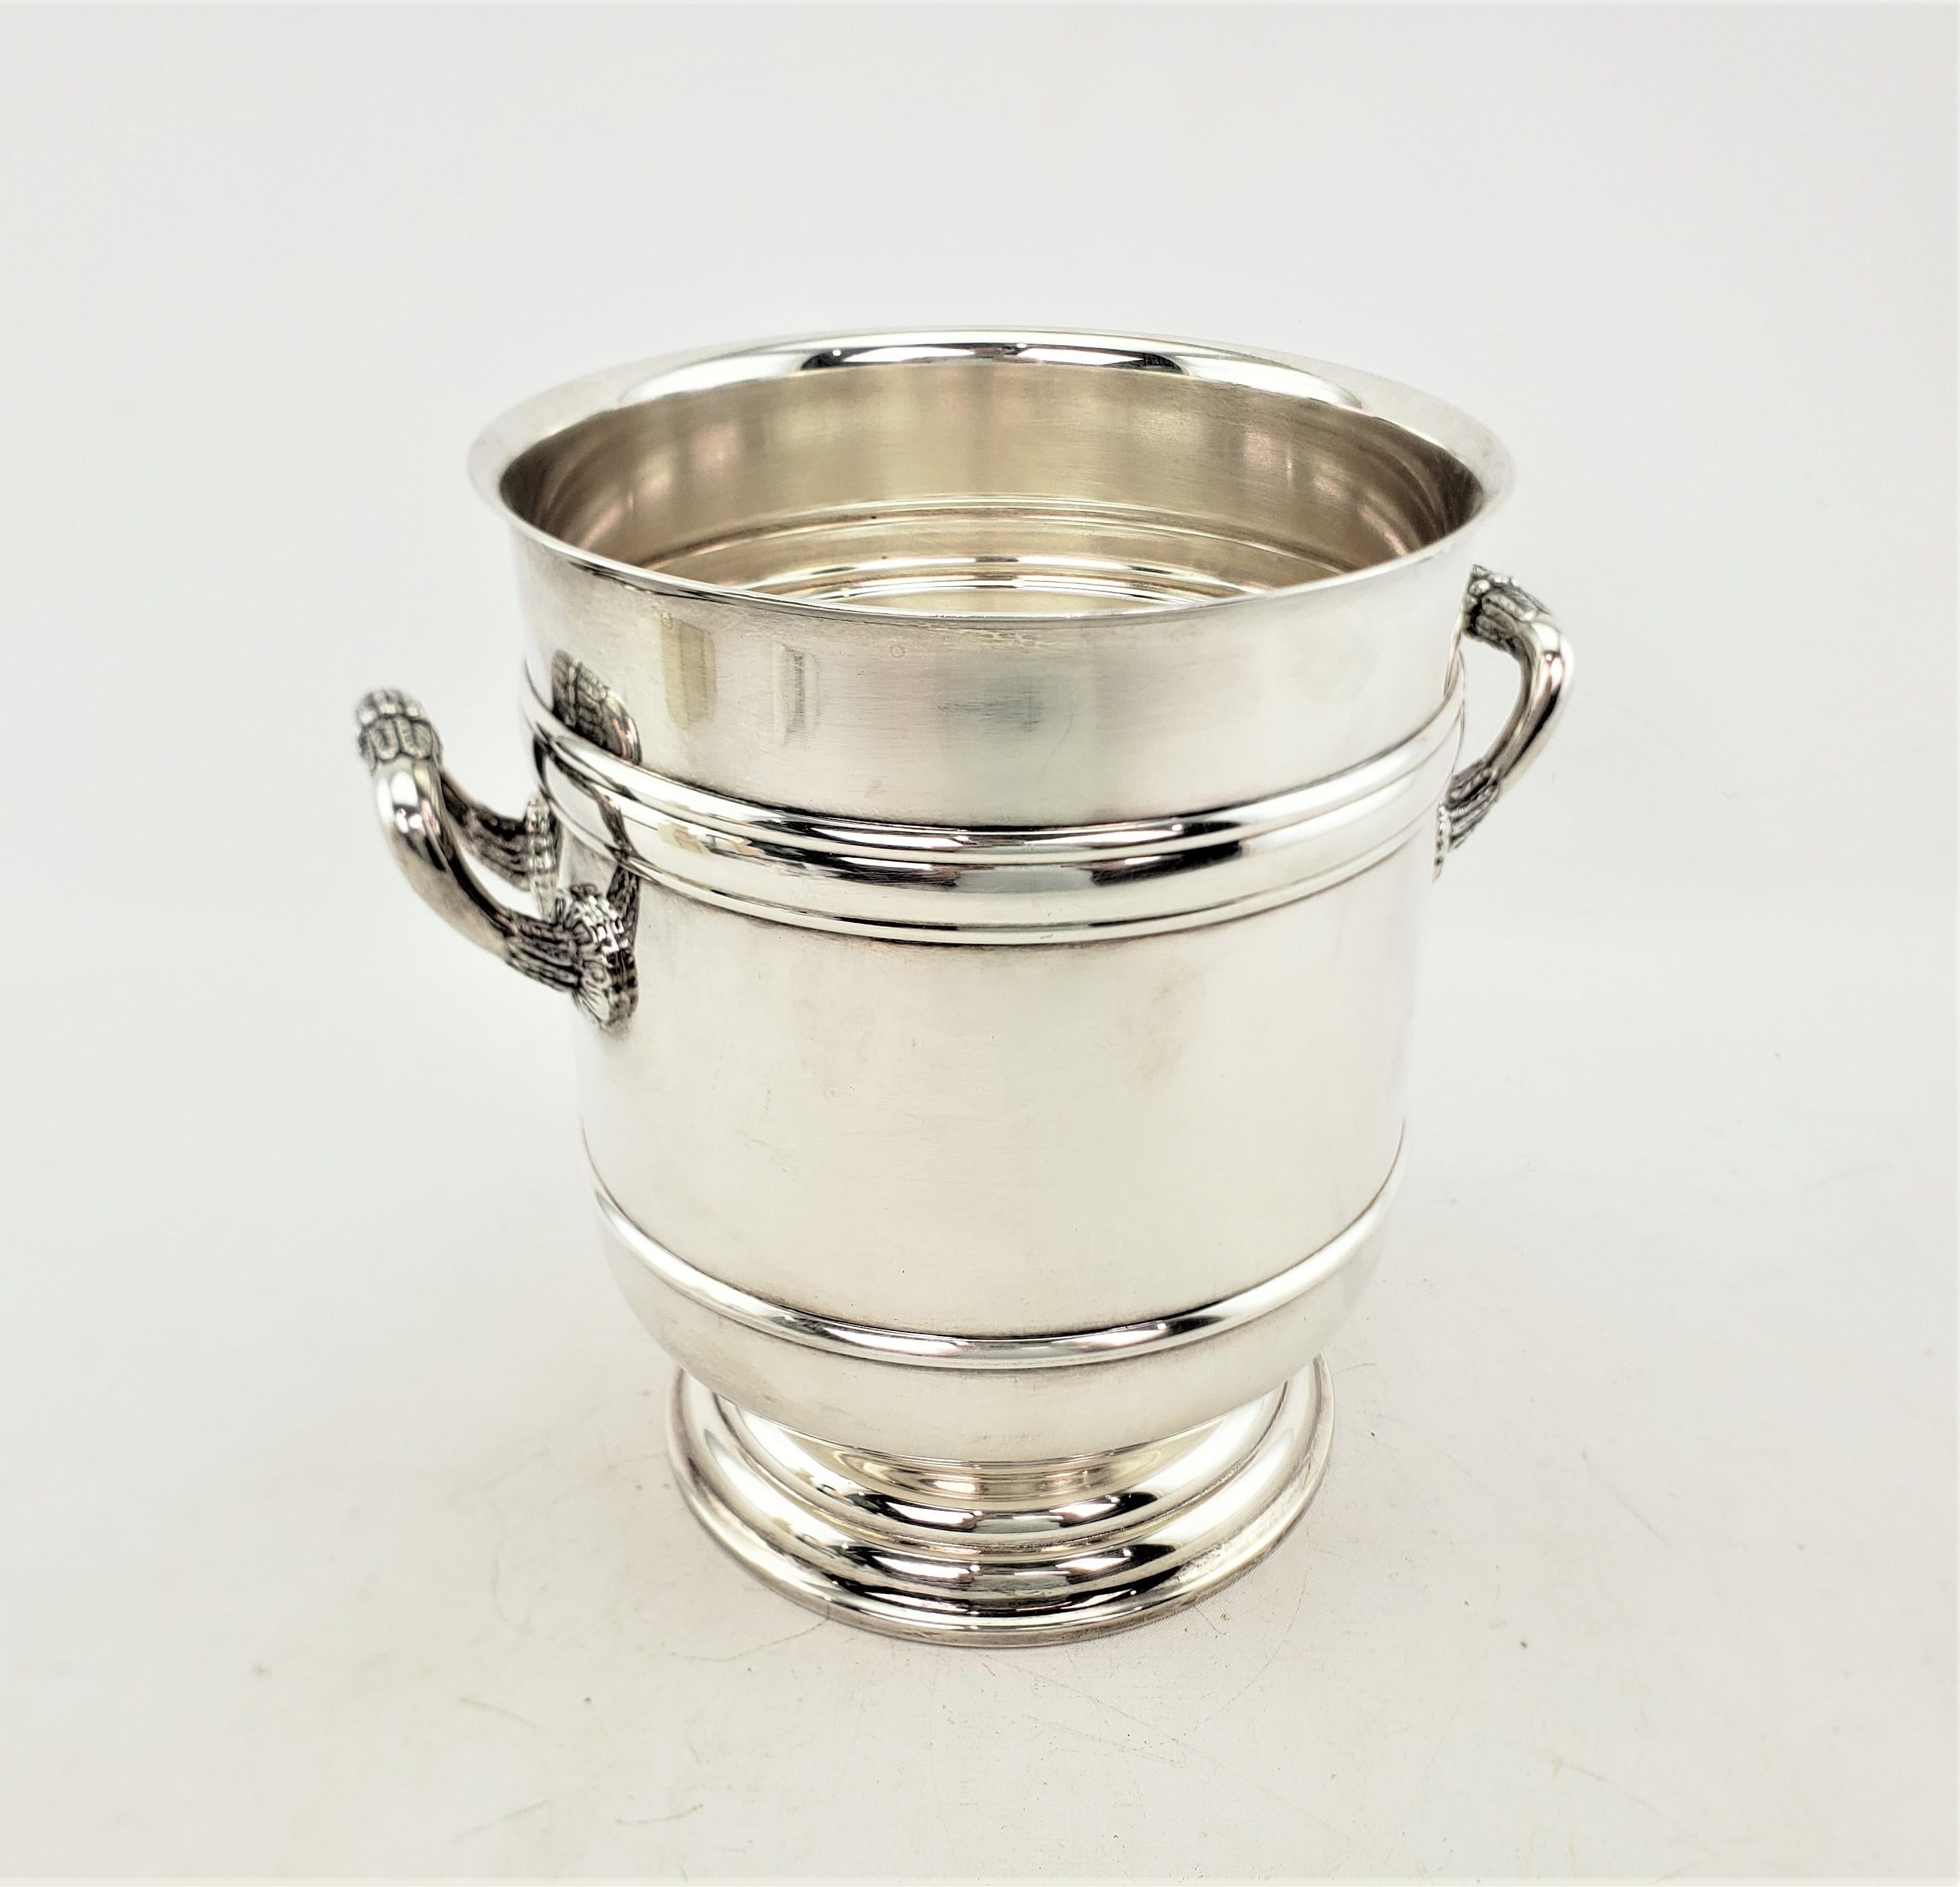 Machine-Made Mid-Century Era Christofle Silver Plated Ice Bucket or Bottle Chiller For Sale